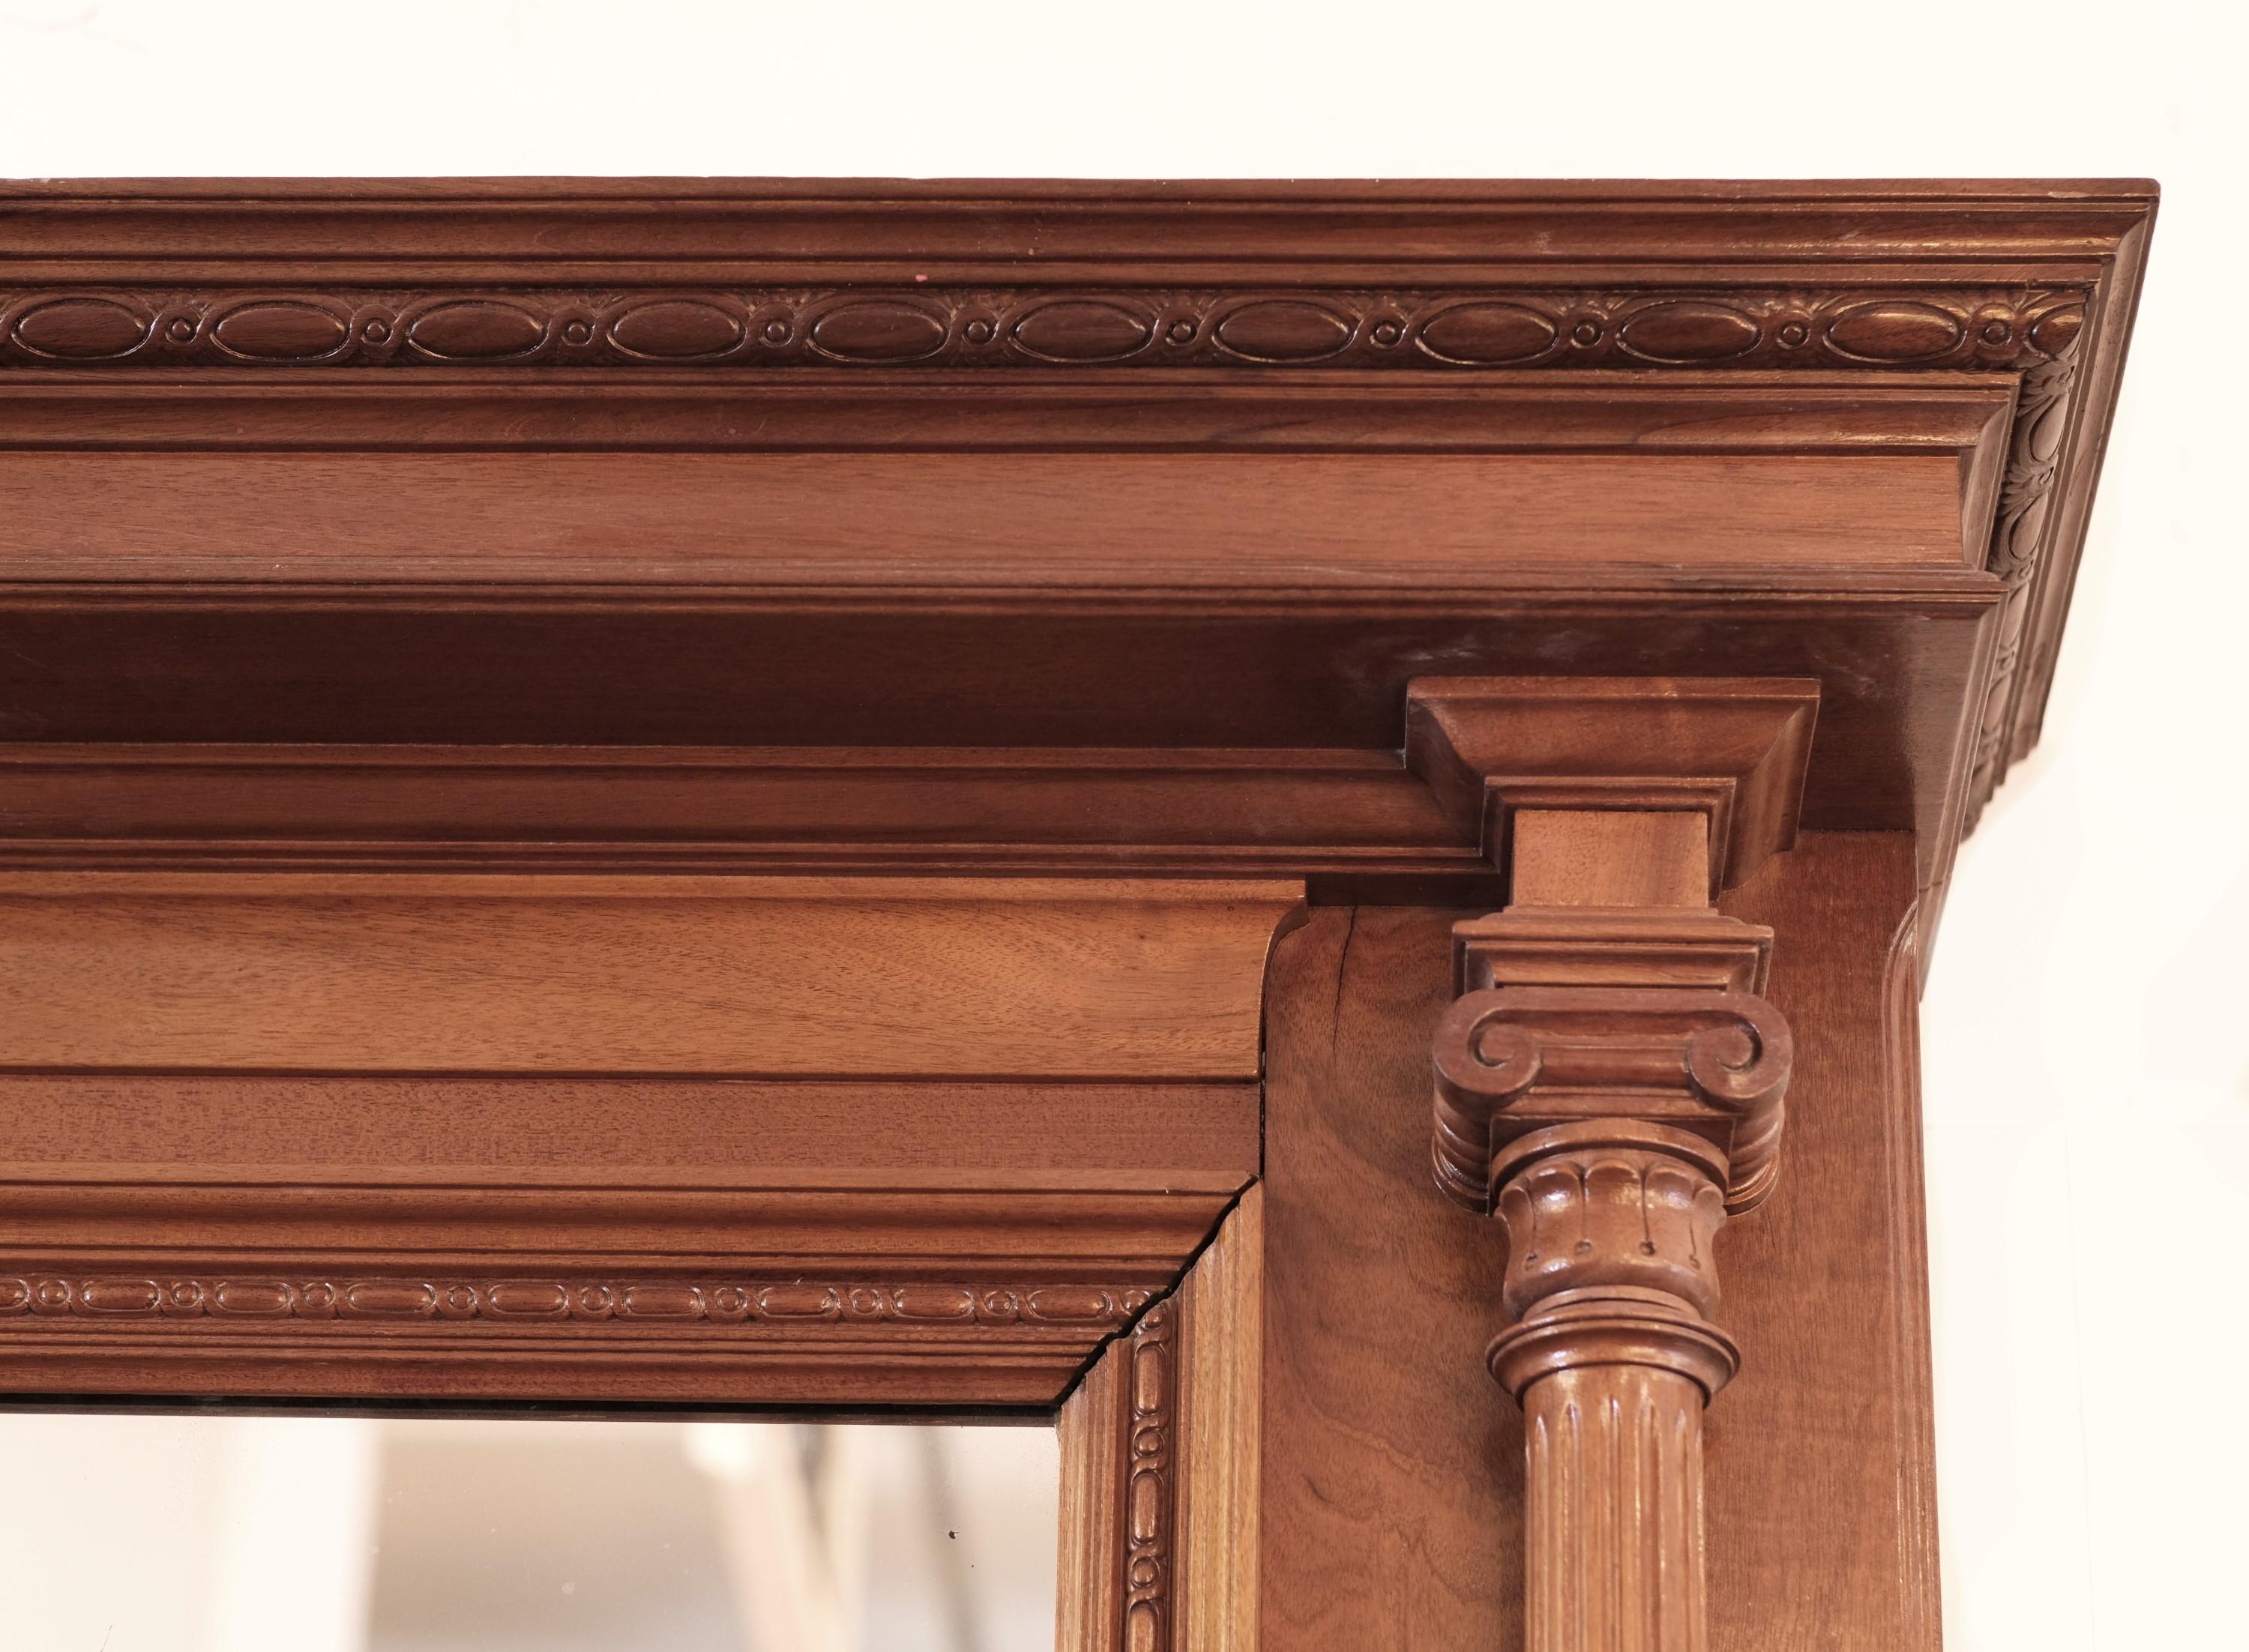 19th Century Hand Carved Mahogany Double Decker Mantel 4 Griffins For Sale